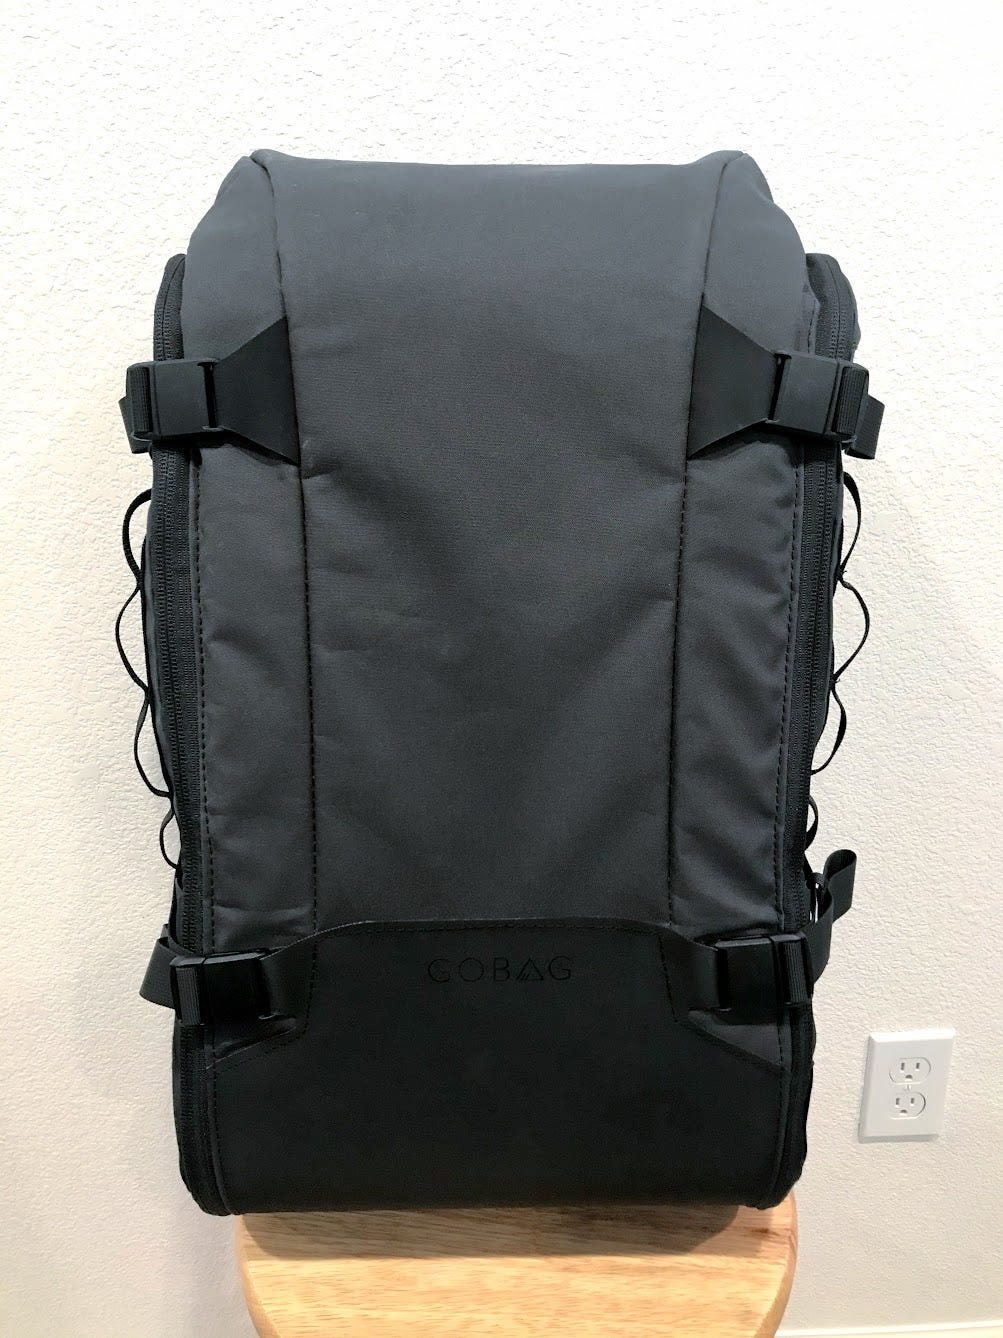 GOBAG Backpack Review. It's time to review yet another one of